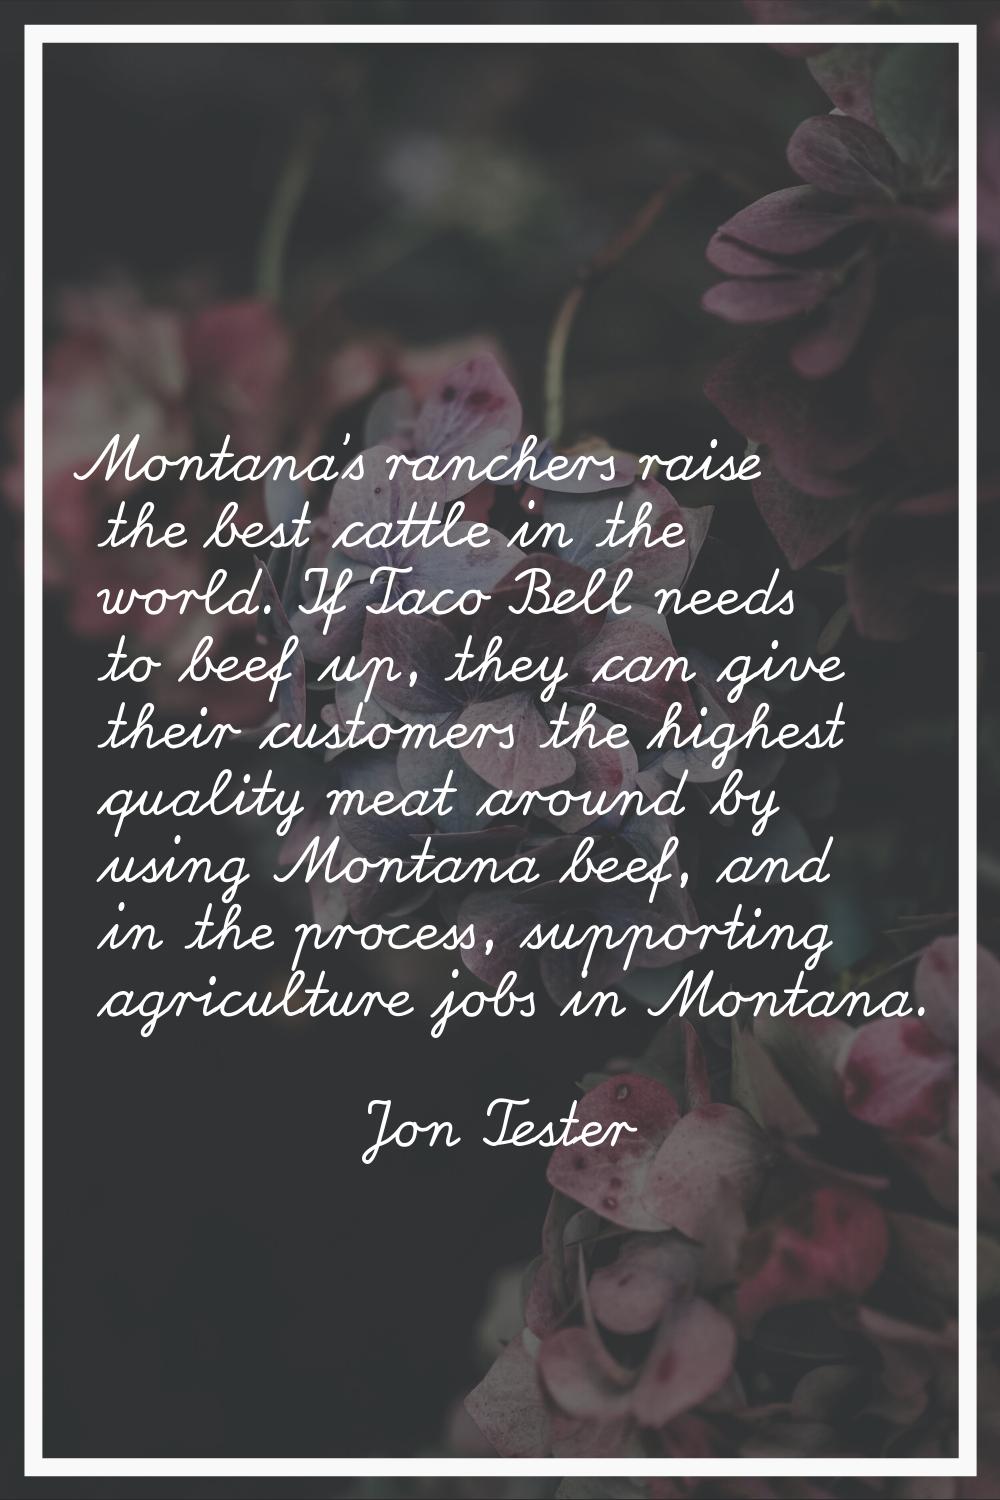 Montana's ranchers raise the best cattle in the world. If Taco Bell needs to beef up, they can give